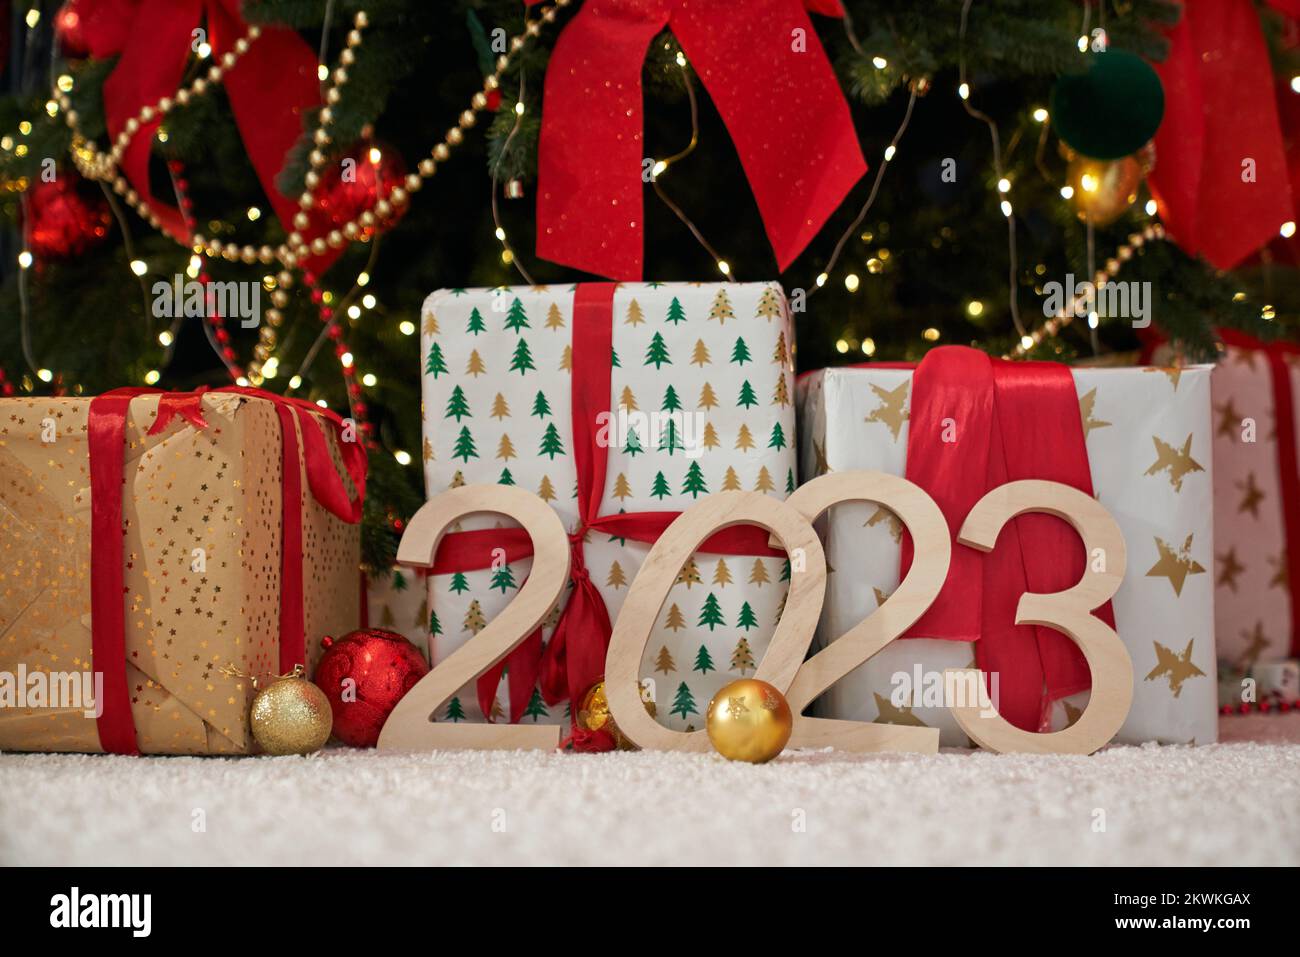 Close up of christmas tree decorated with red bows and golden balls standing in studio. People celebrating new year, waiting, expecting. Concept of new year and celebration. Stock Photo